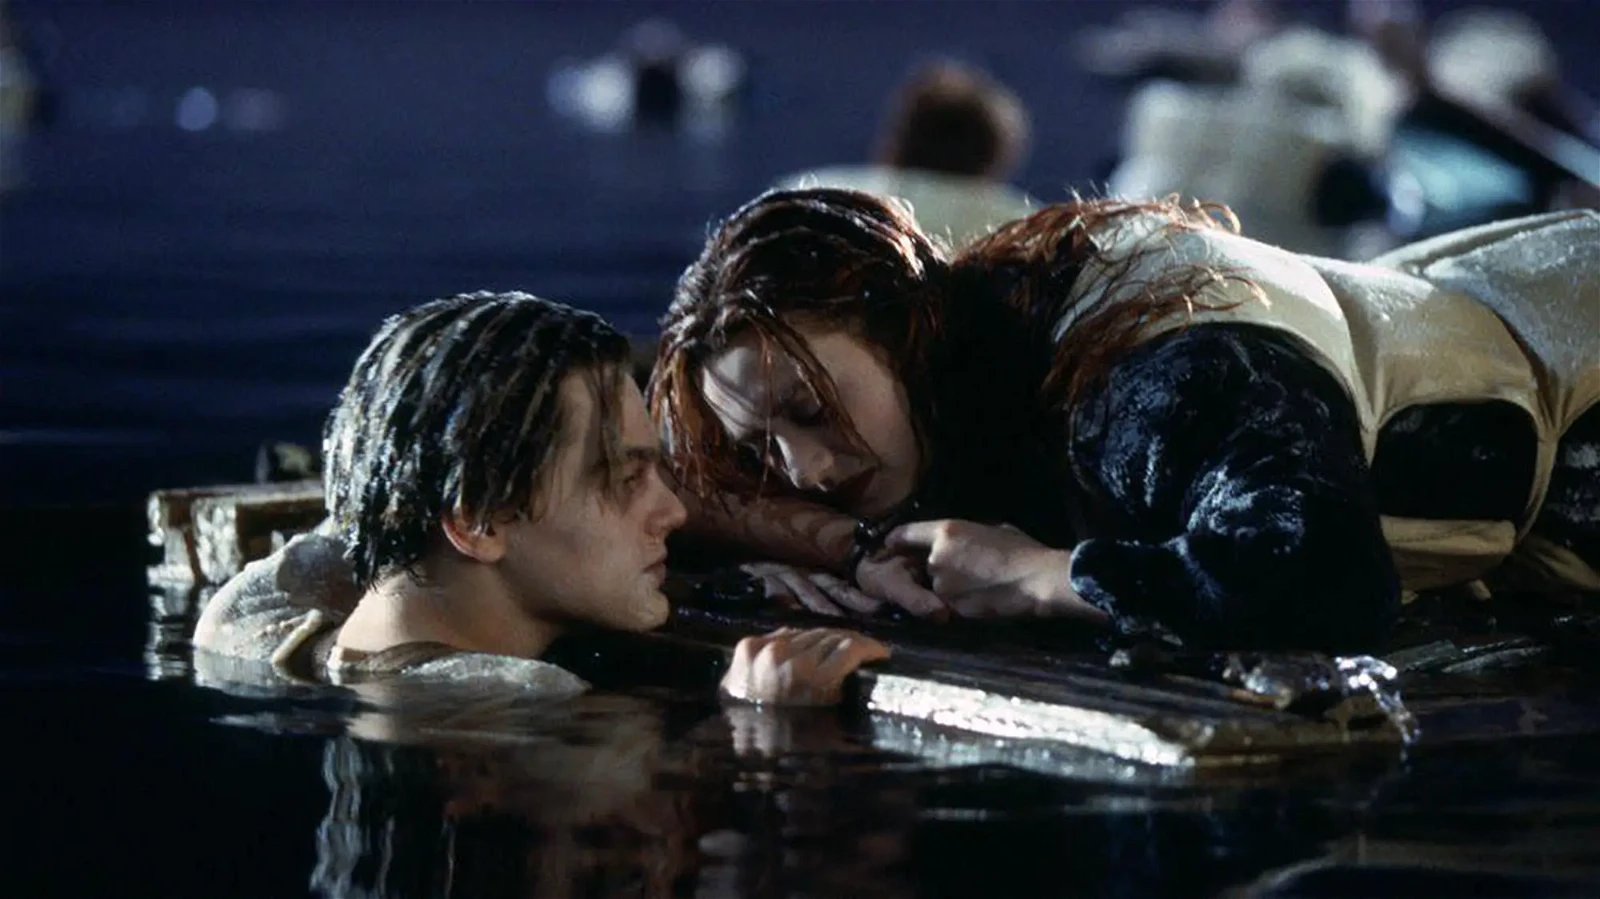 Kate Winslet took the role of Rose from Gwyneth Paltrow in Titanic (1997).